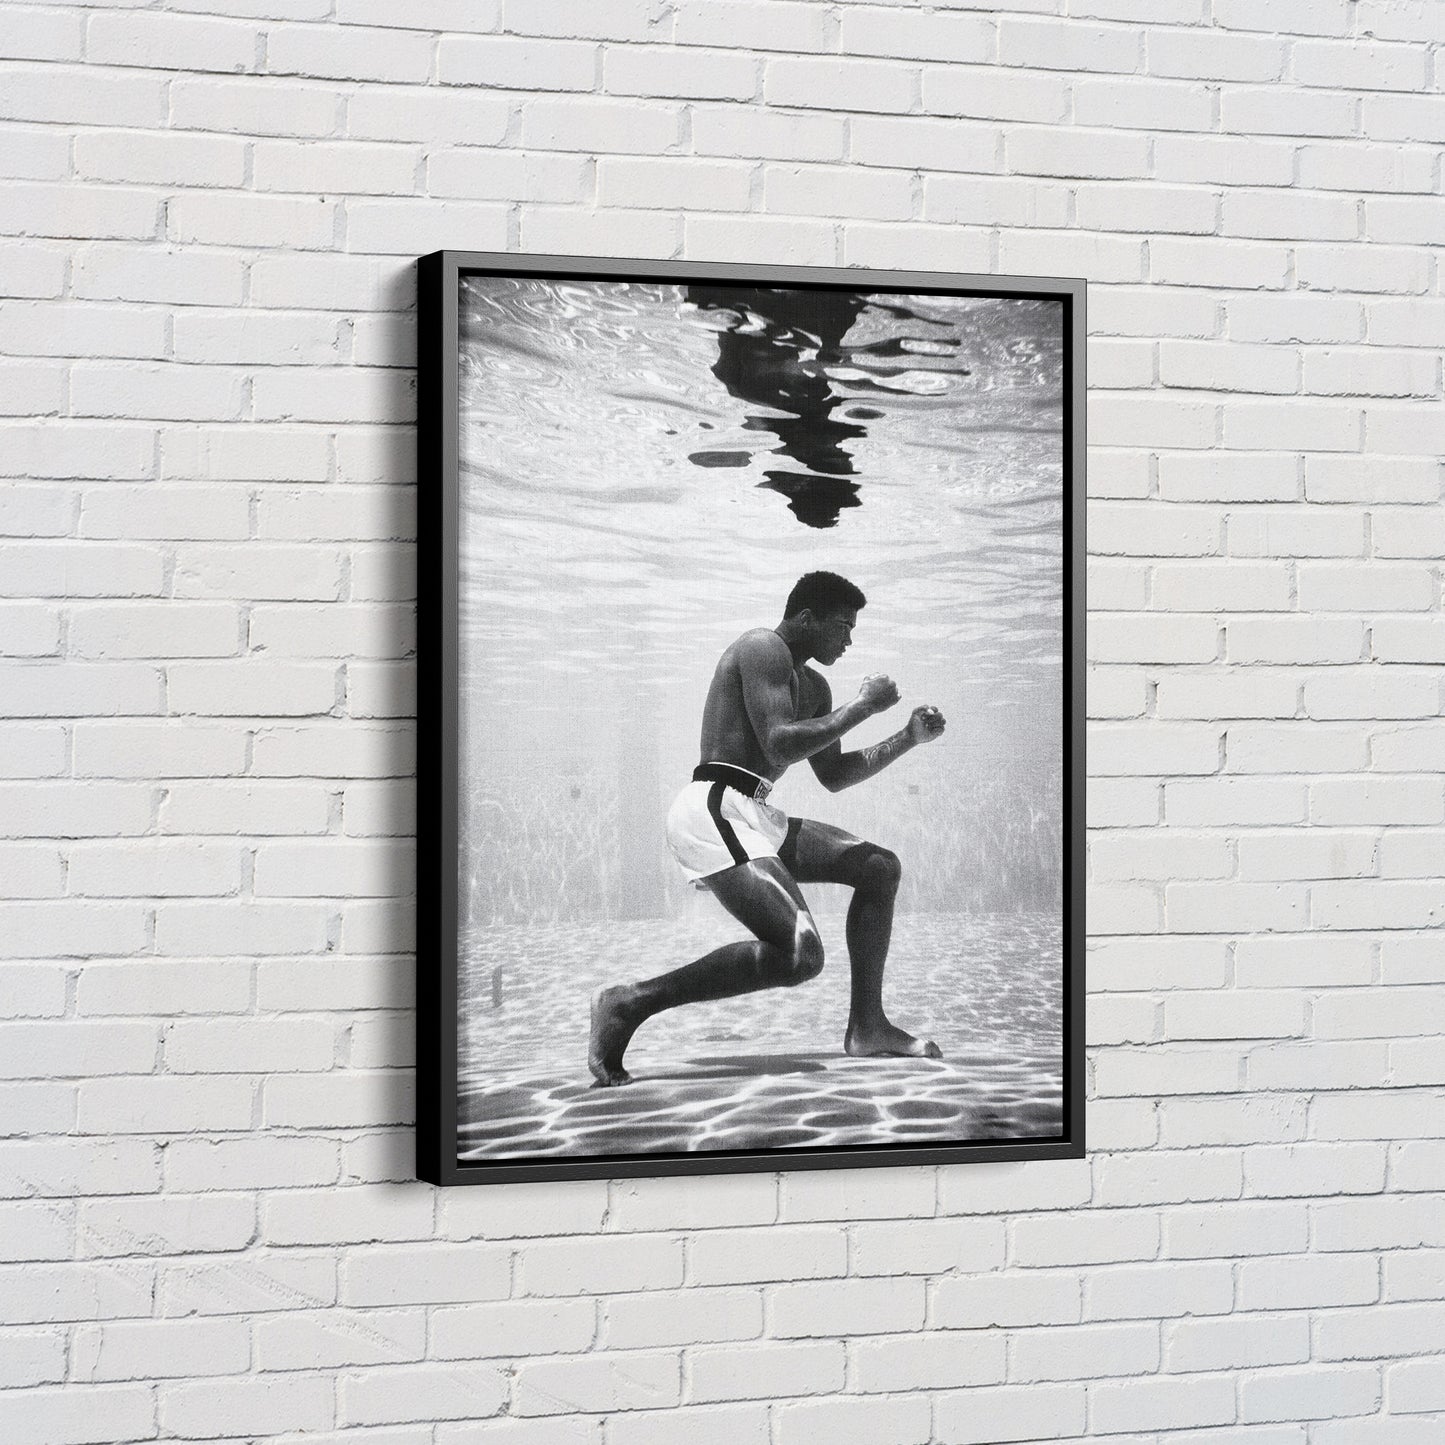 Muhammad Ali Poster Underwater Boxing Black and White Wall Art Home Decor Hand Made Canvas Print